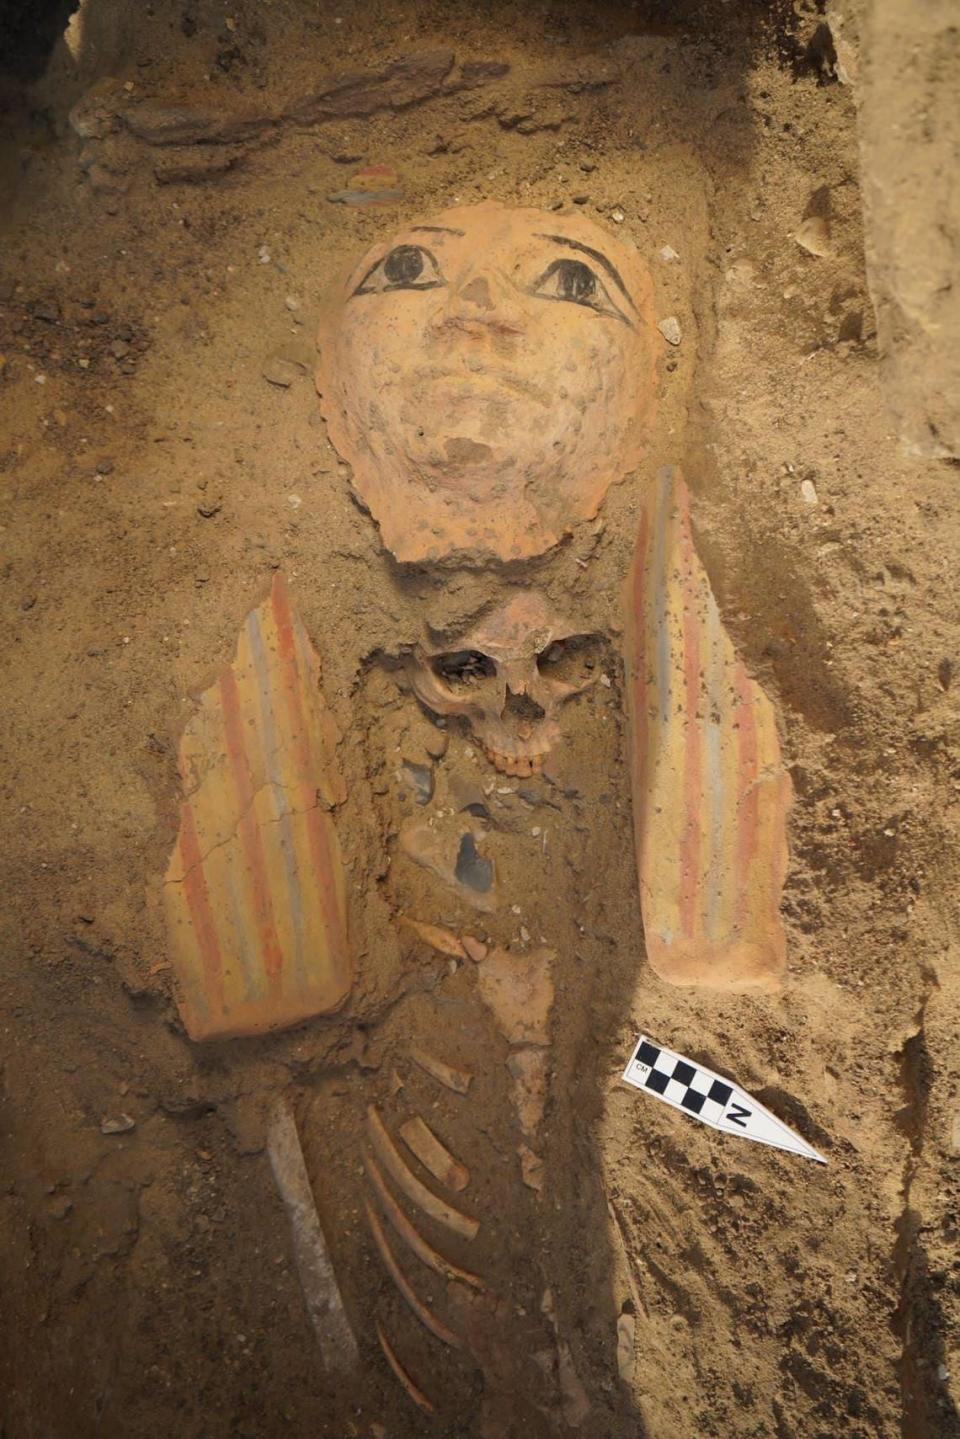 One of the burials found at the Saqqara site.